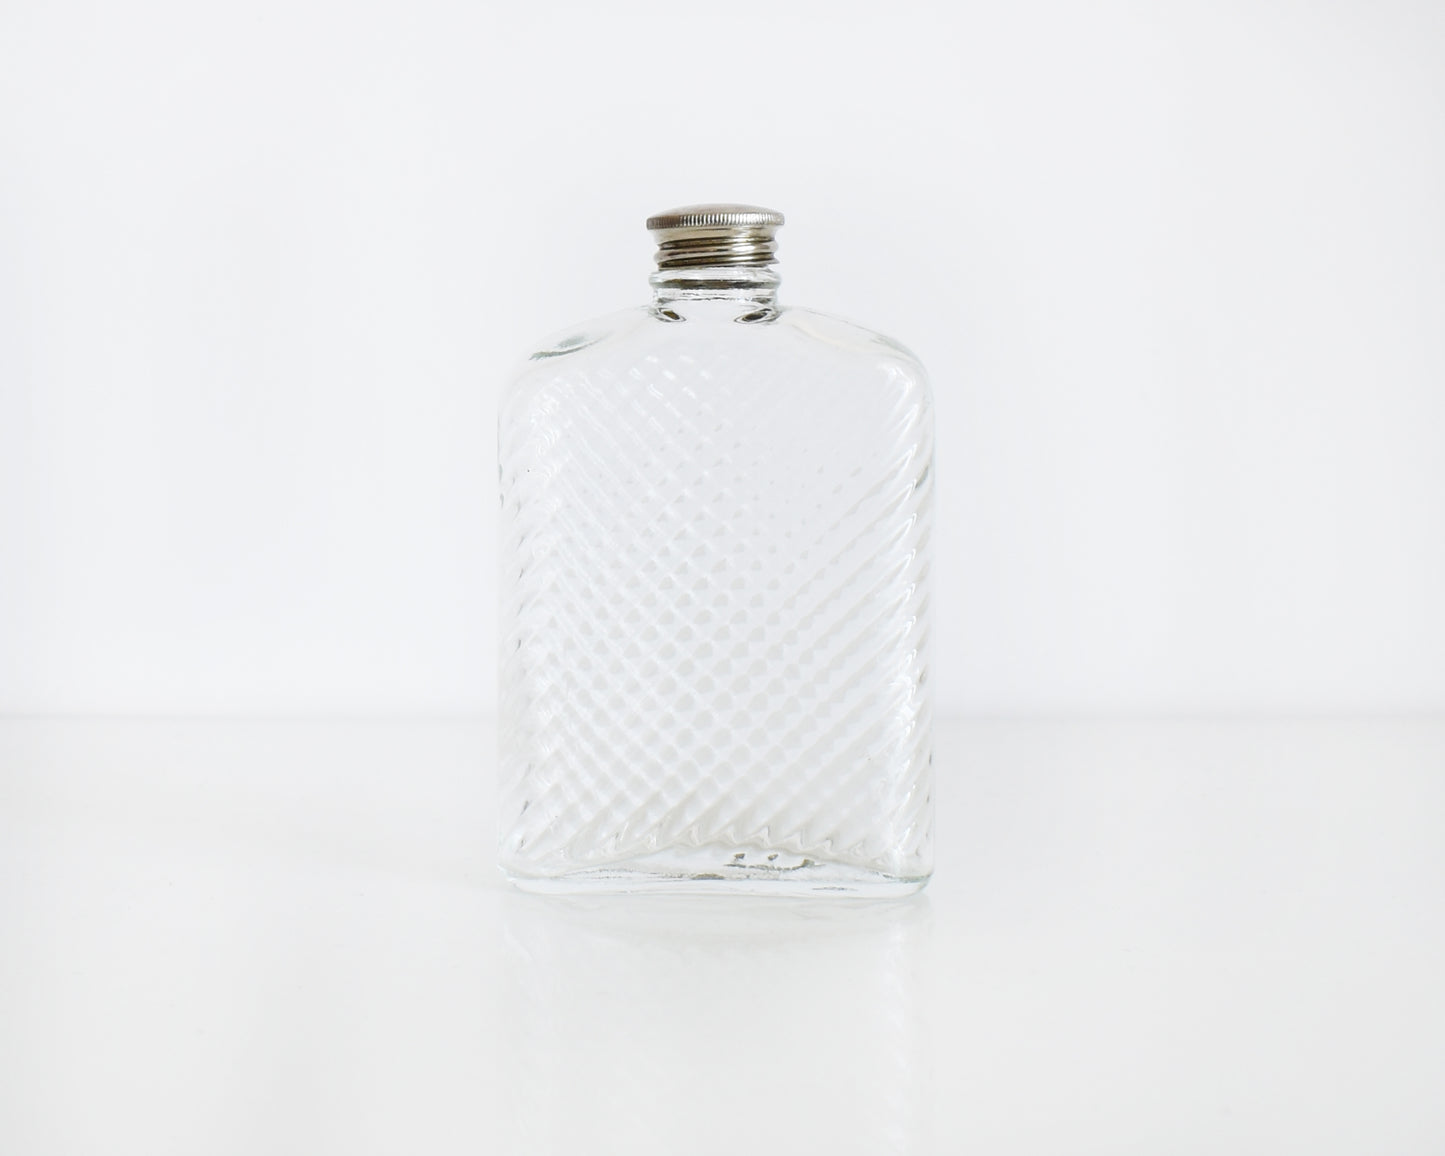 Back view of a vintage glass flask that has a cut diamond pattern and a silver screw top. The flask is on a white table and a white background.